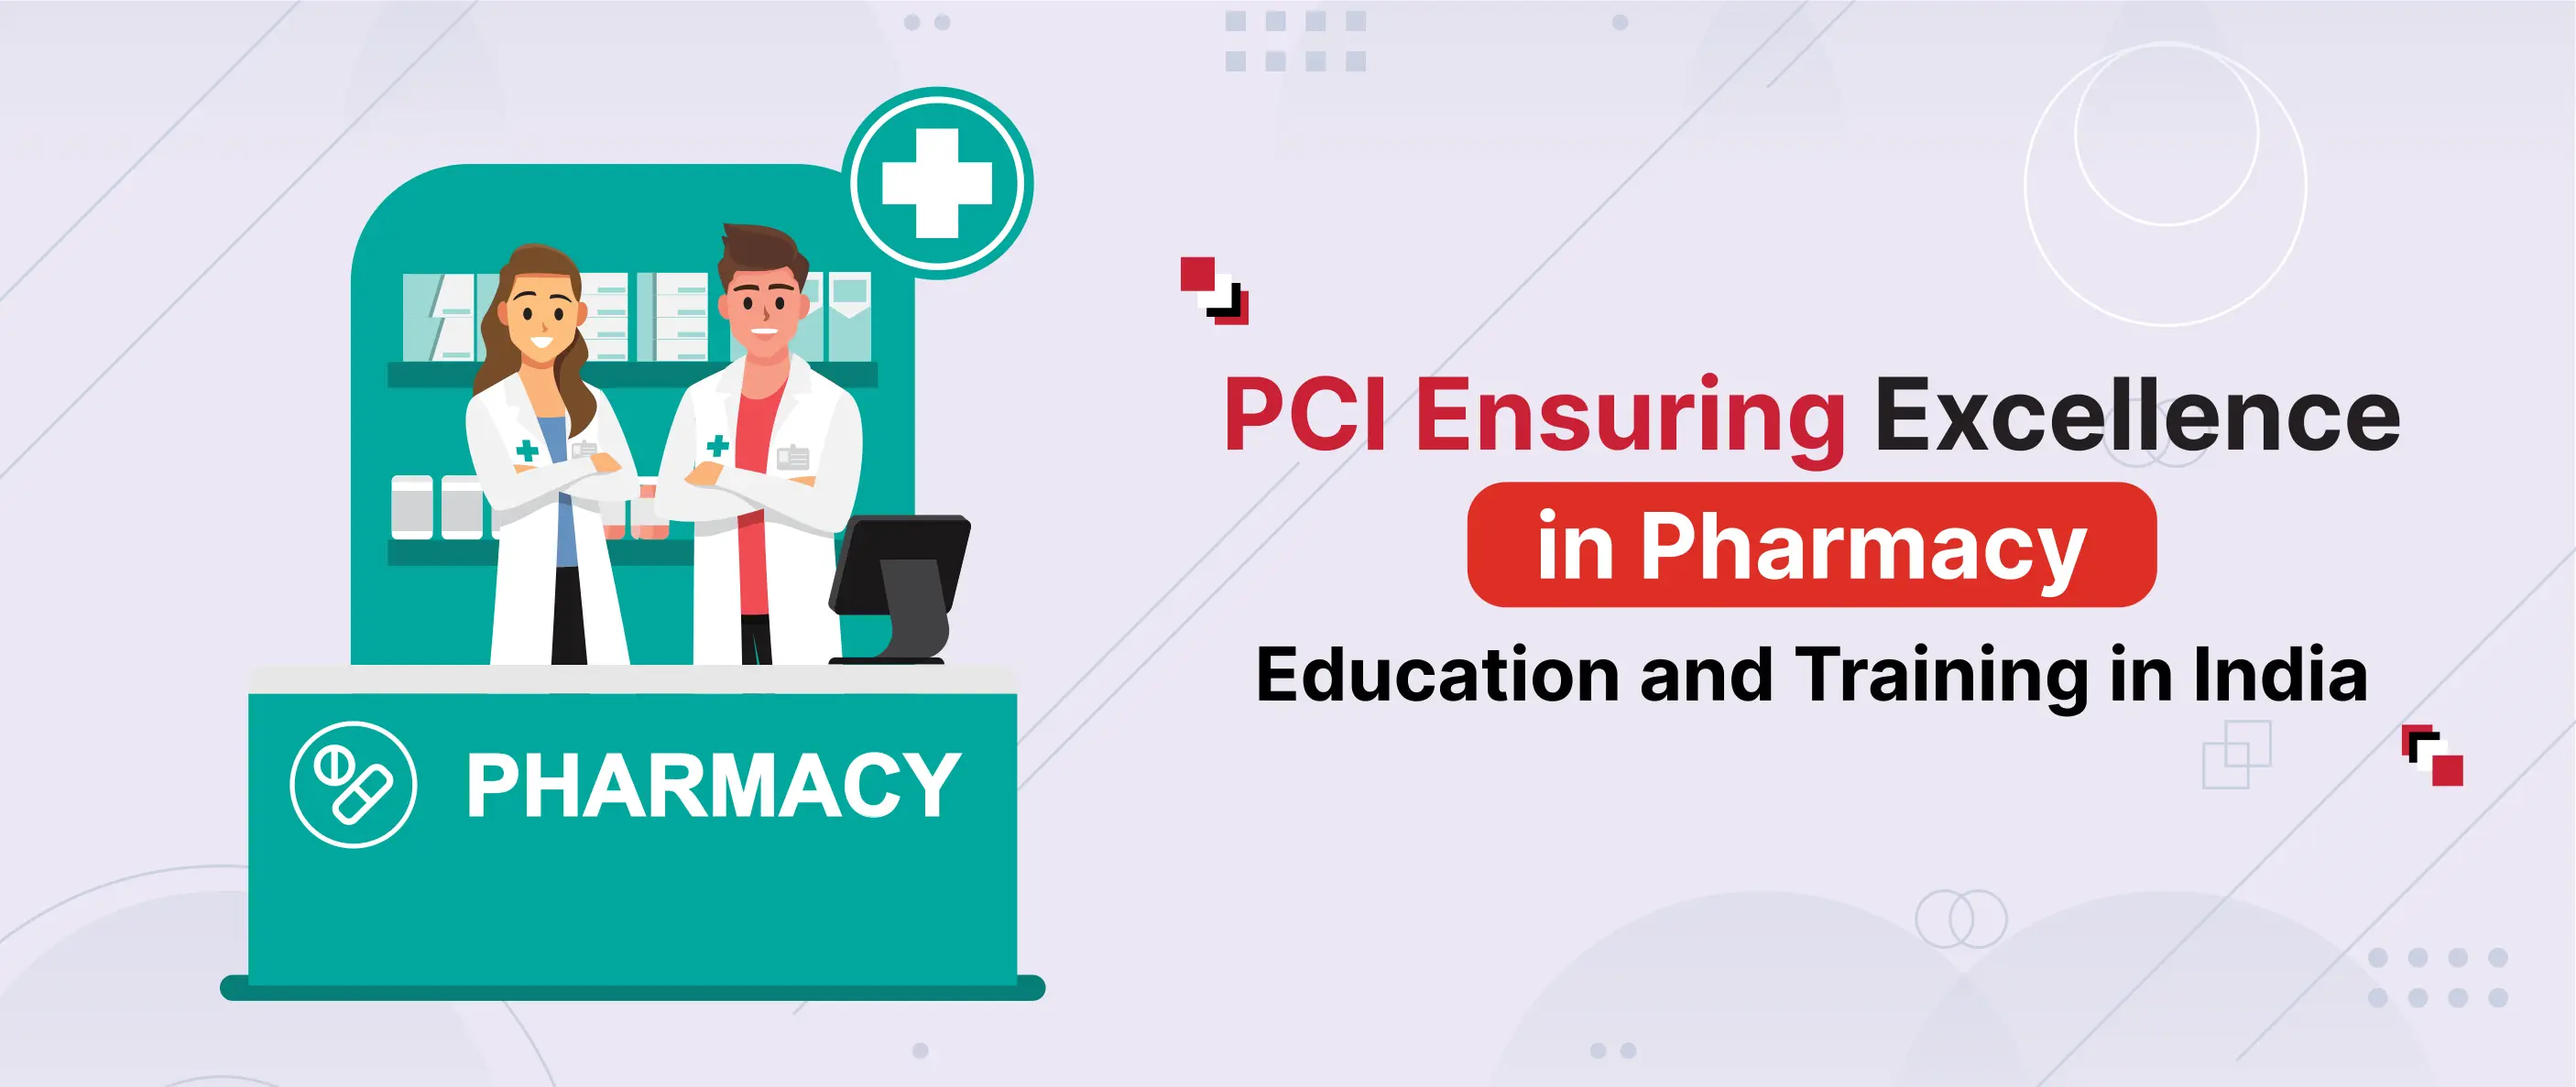 PCI Ensuring Excellence in Pharmacy Education and Training in India